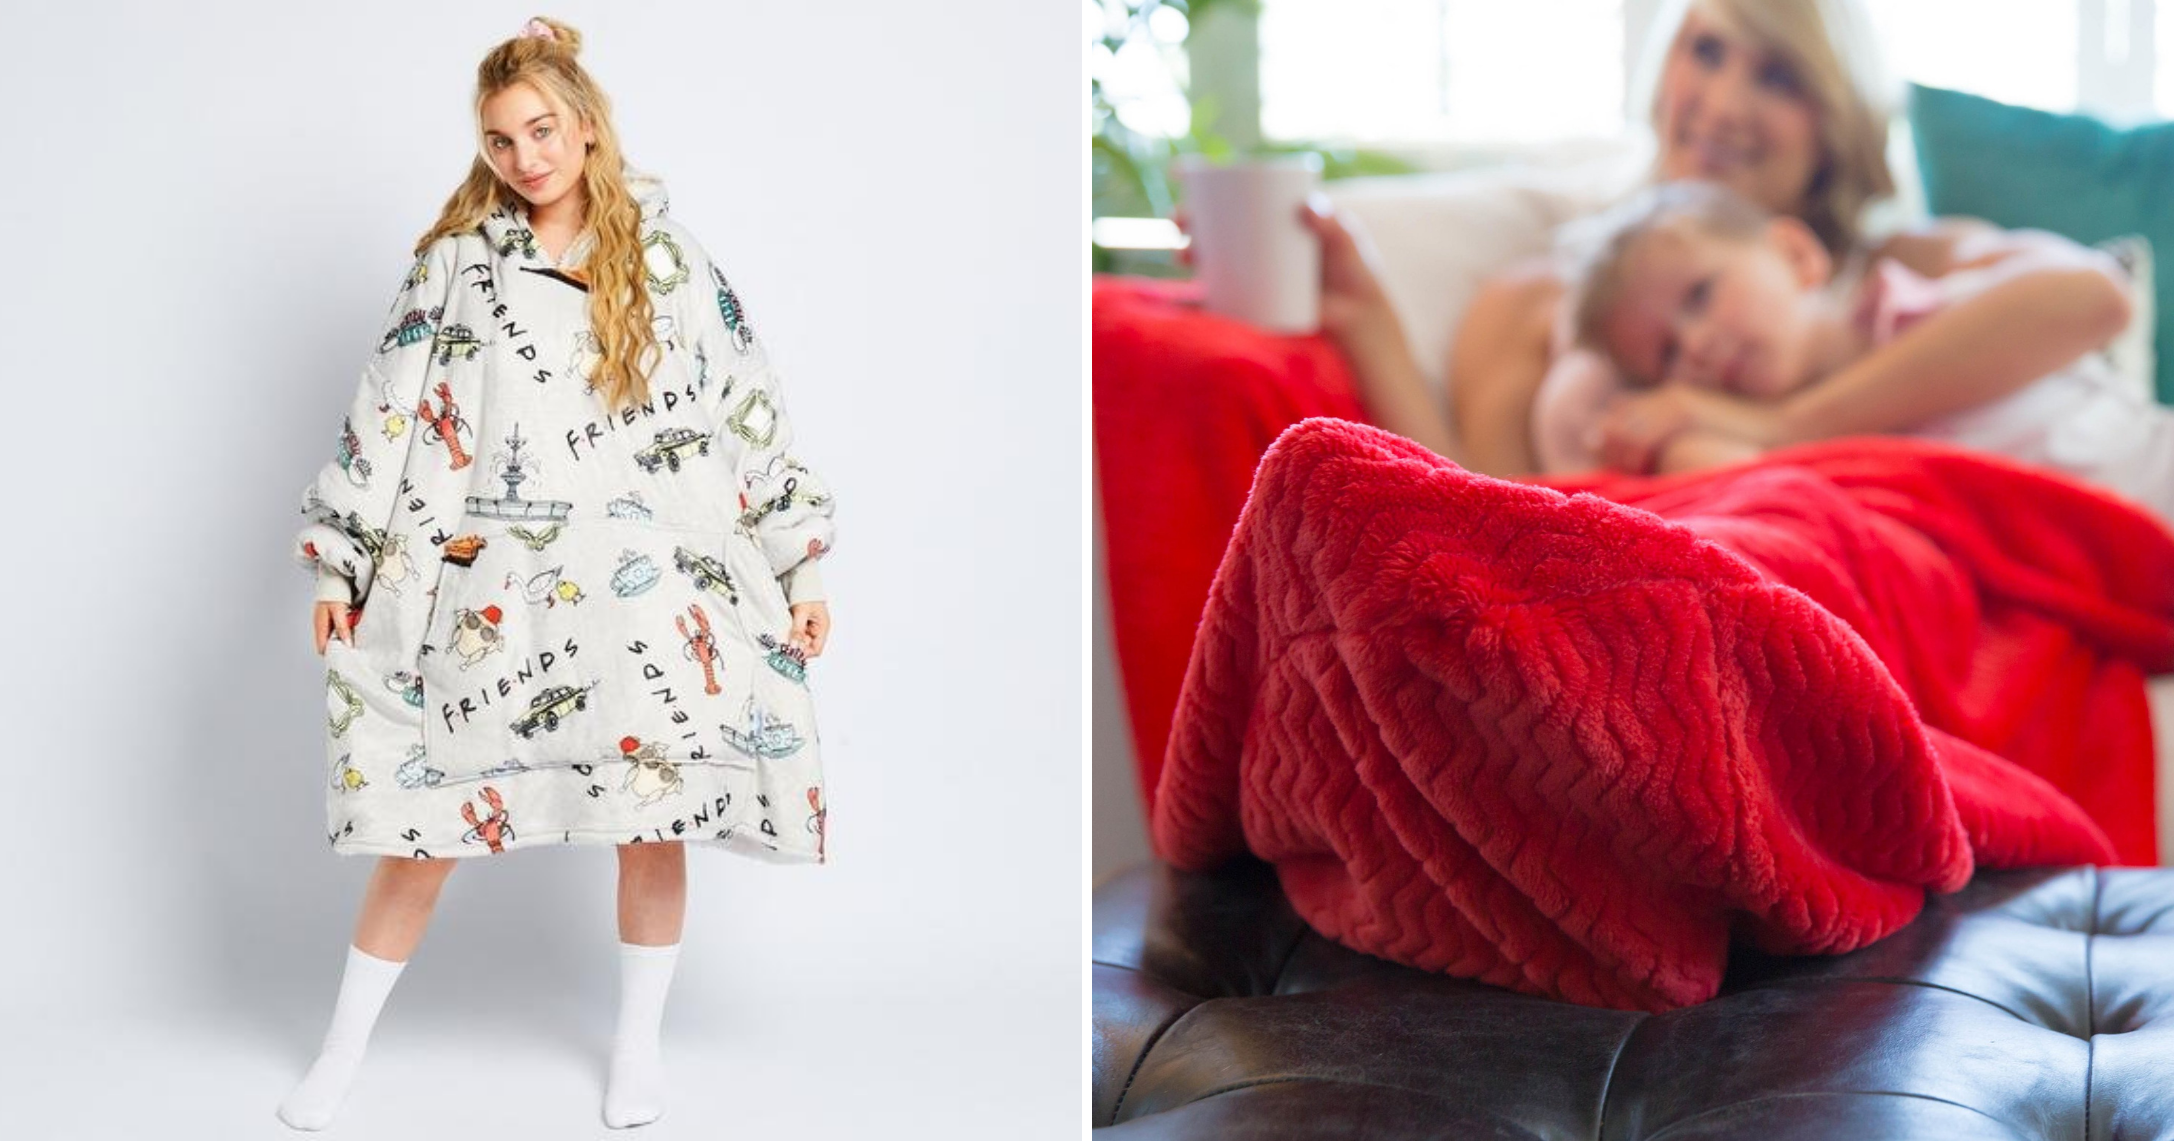 10 Cozy Gifts for Moms - Family Food on the Table